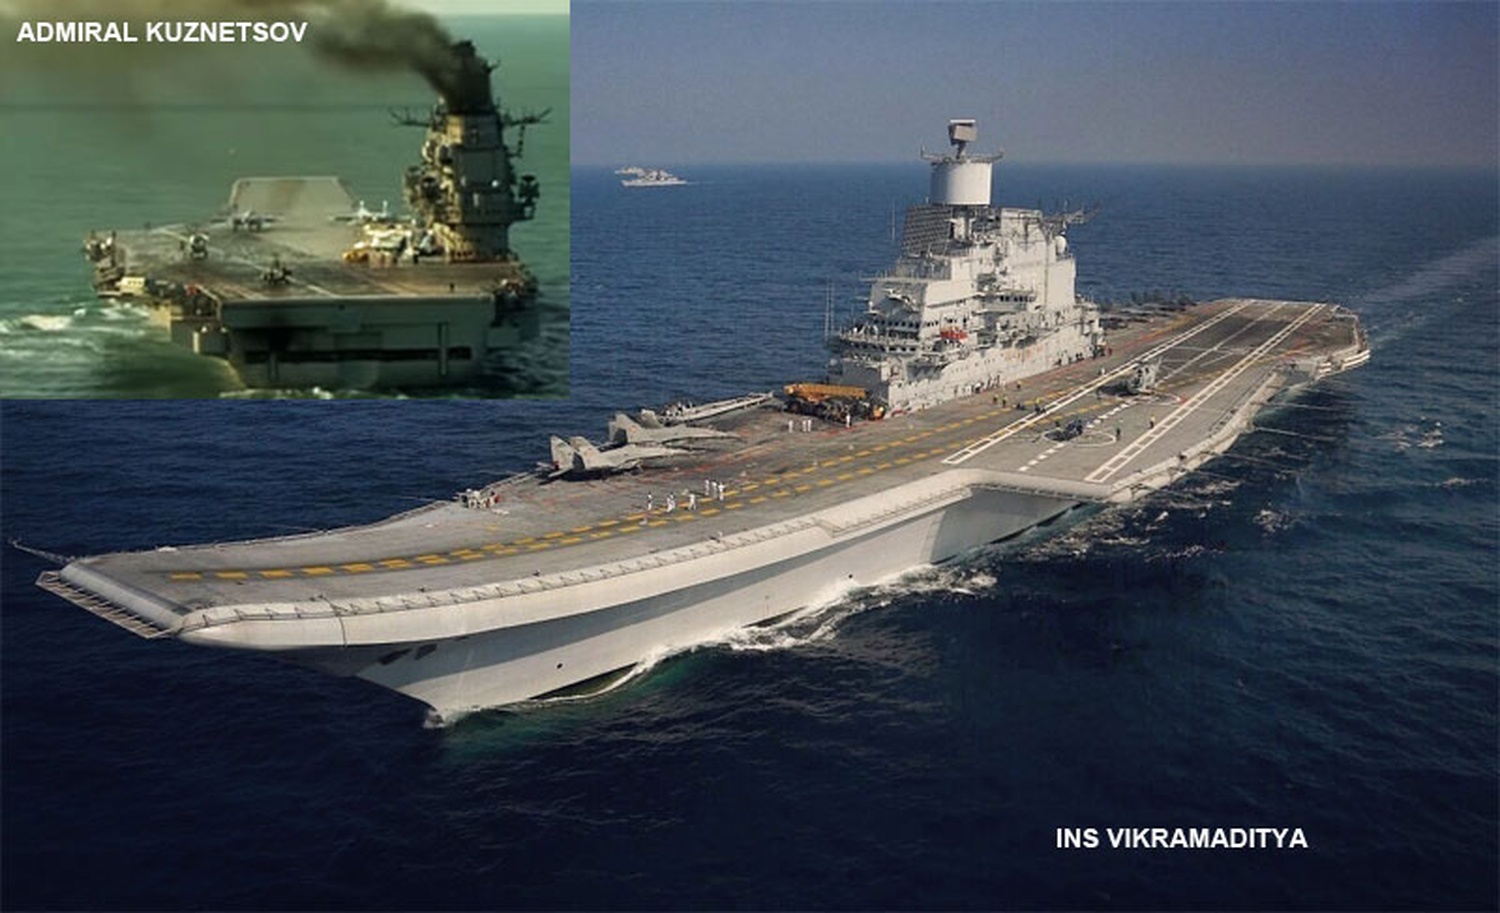 India’s Second Aircraft Carrier begins Sea Trials as India Sending a Naval Task Force to South China Sea to Counter China